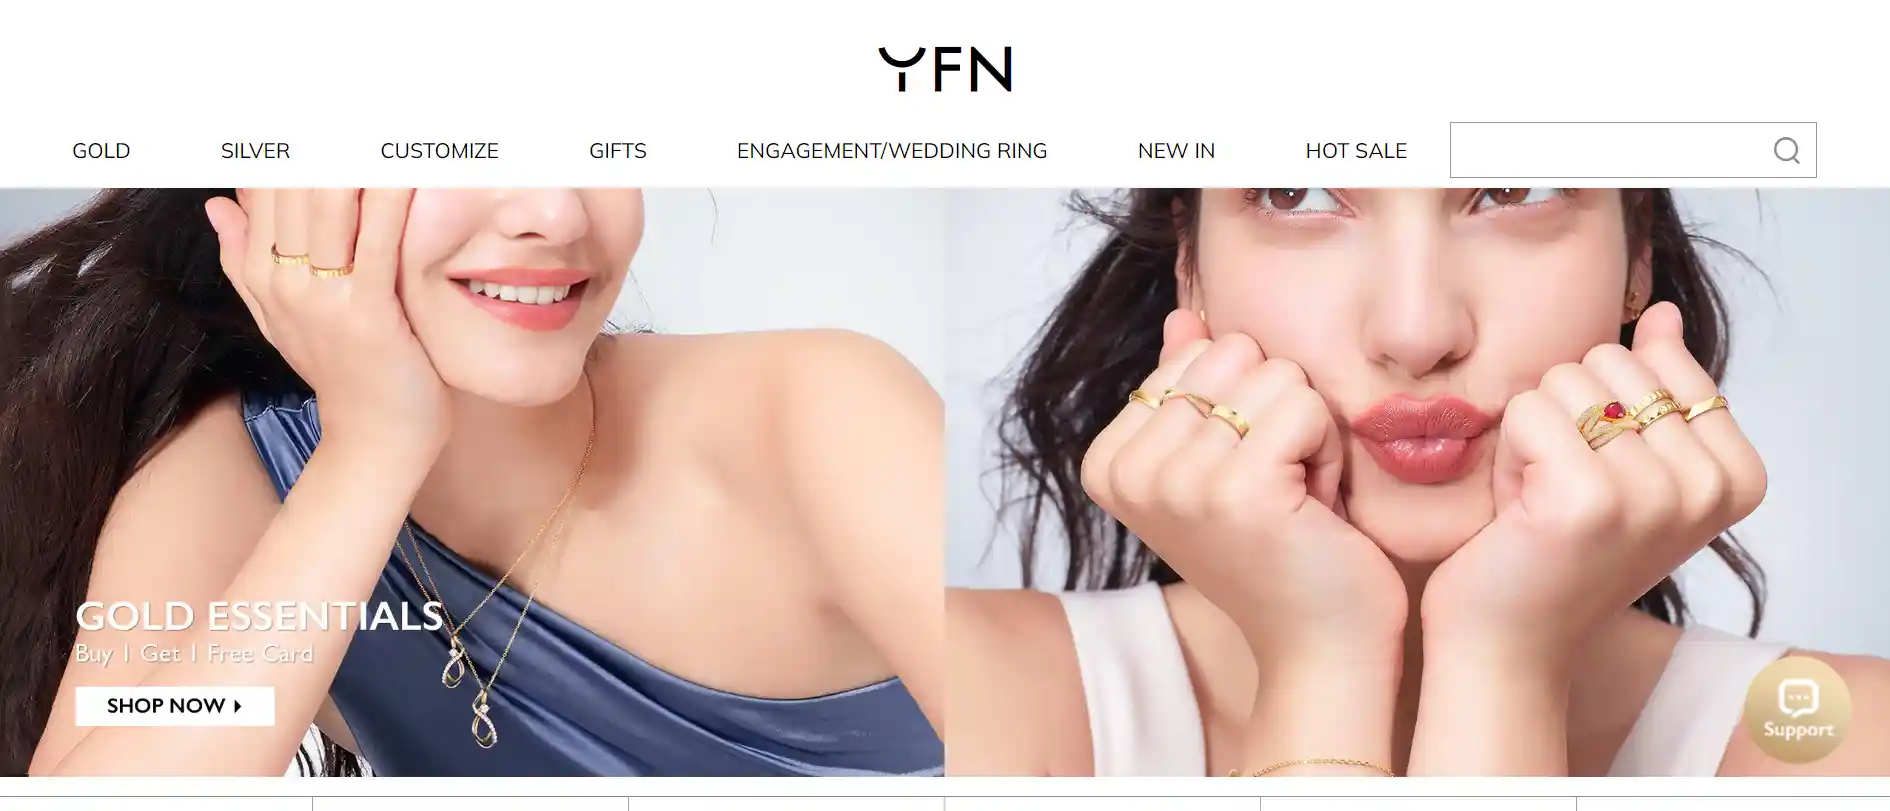 You are currently viewing Yfn Jewelry Reviews: Is It Worth Your Money?